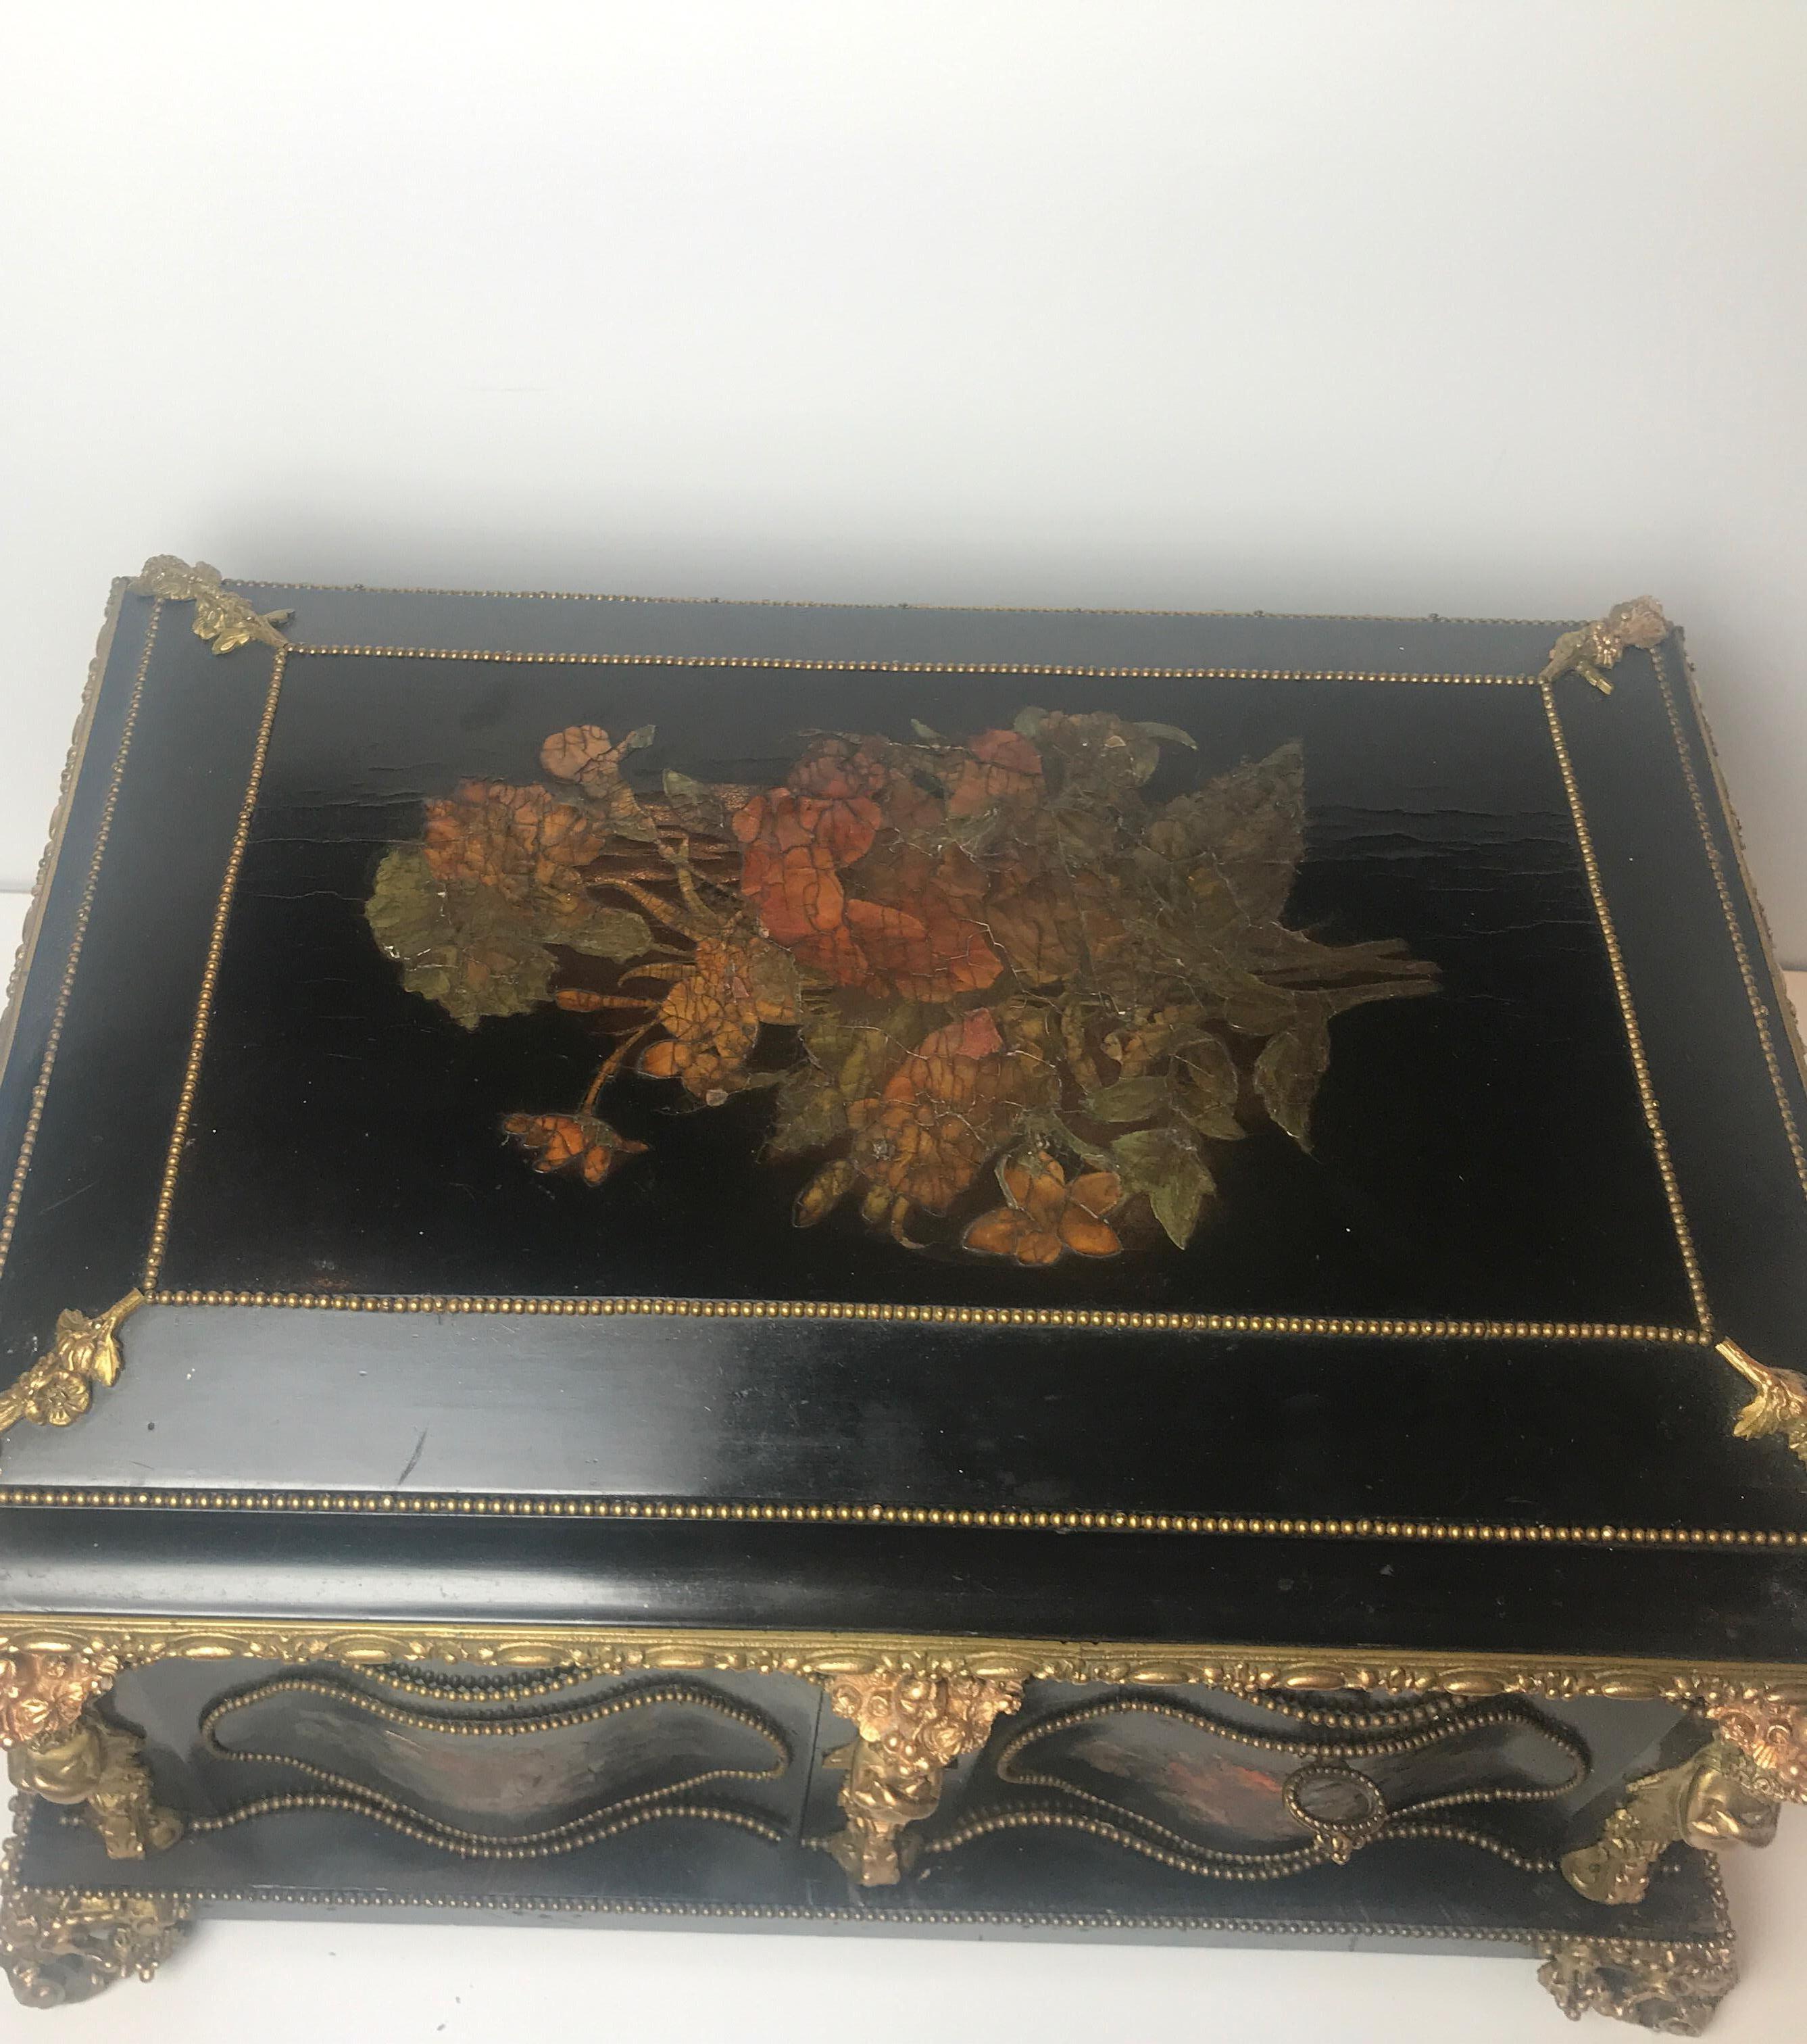 Large 19th Century Continental Neoclassical Between Dresser Vanity Box For Sale 1